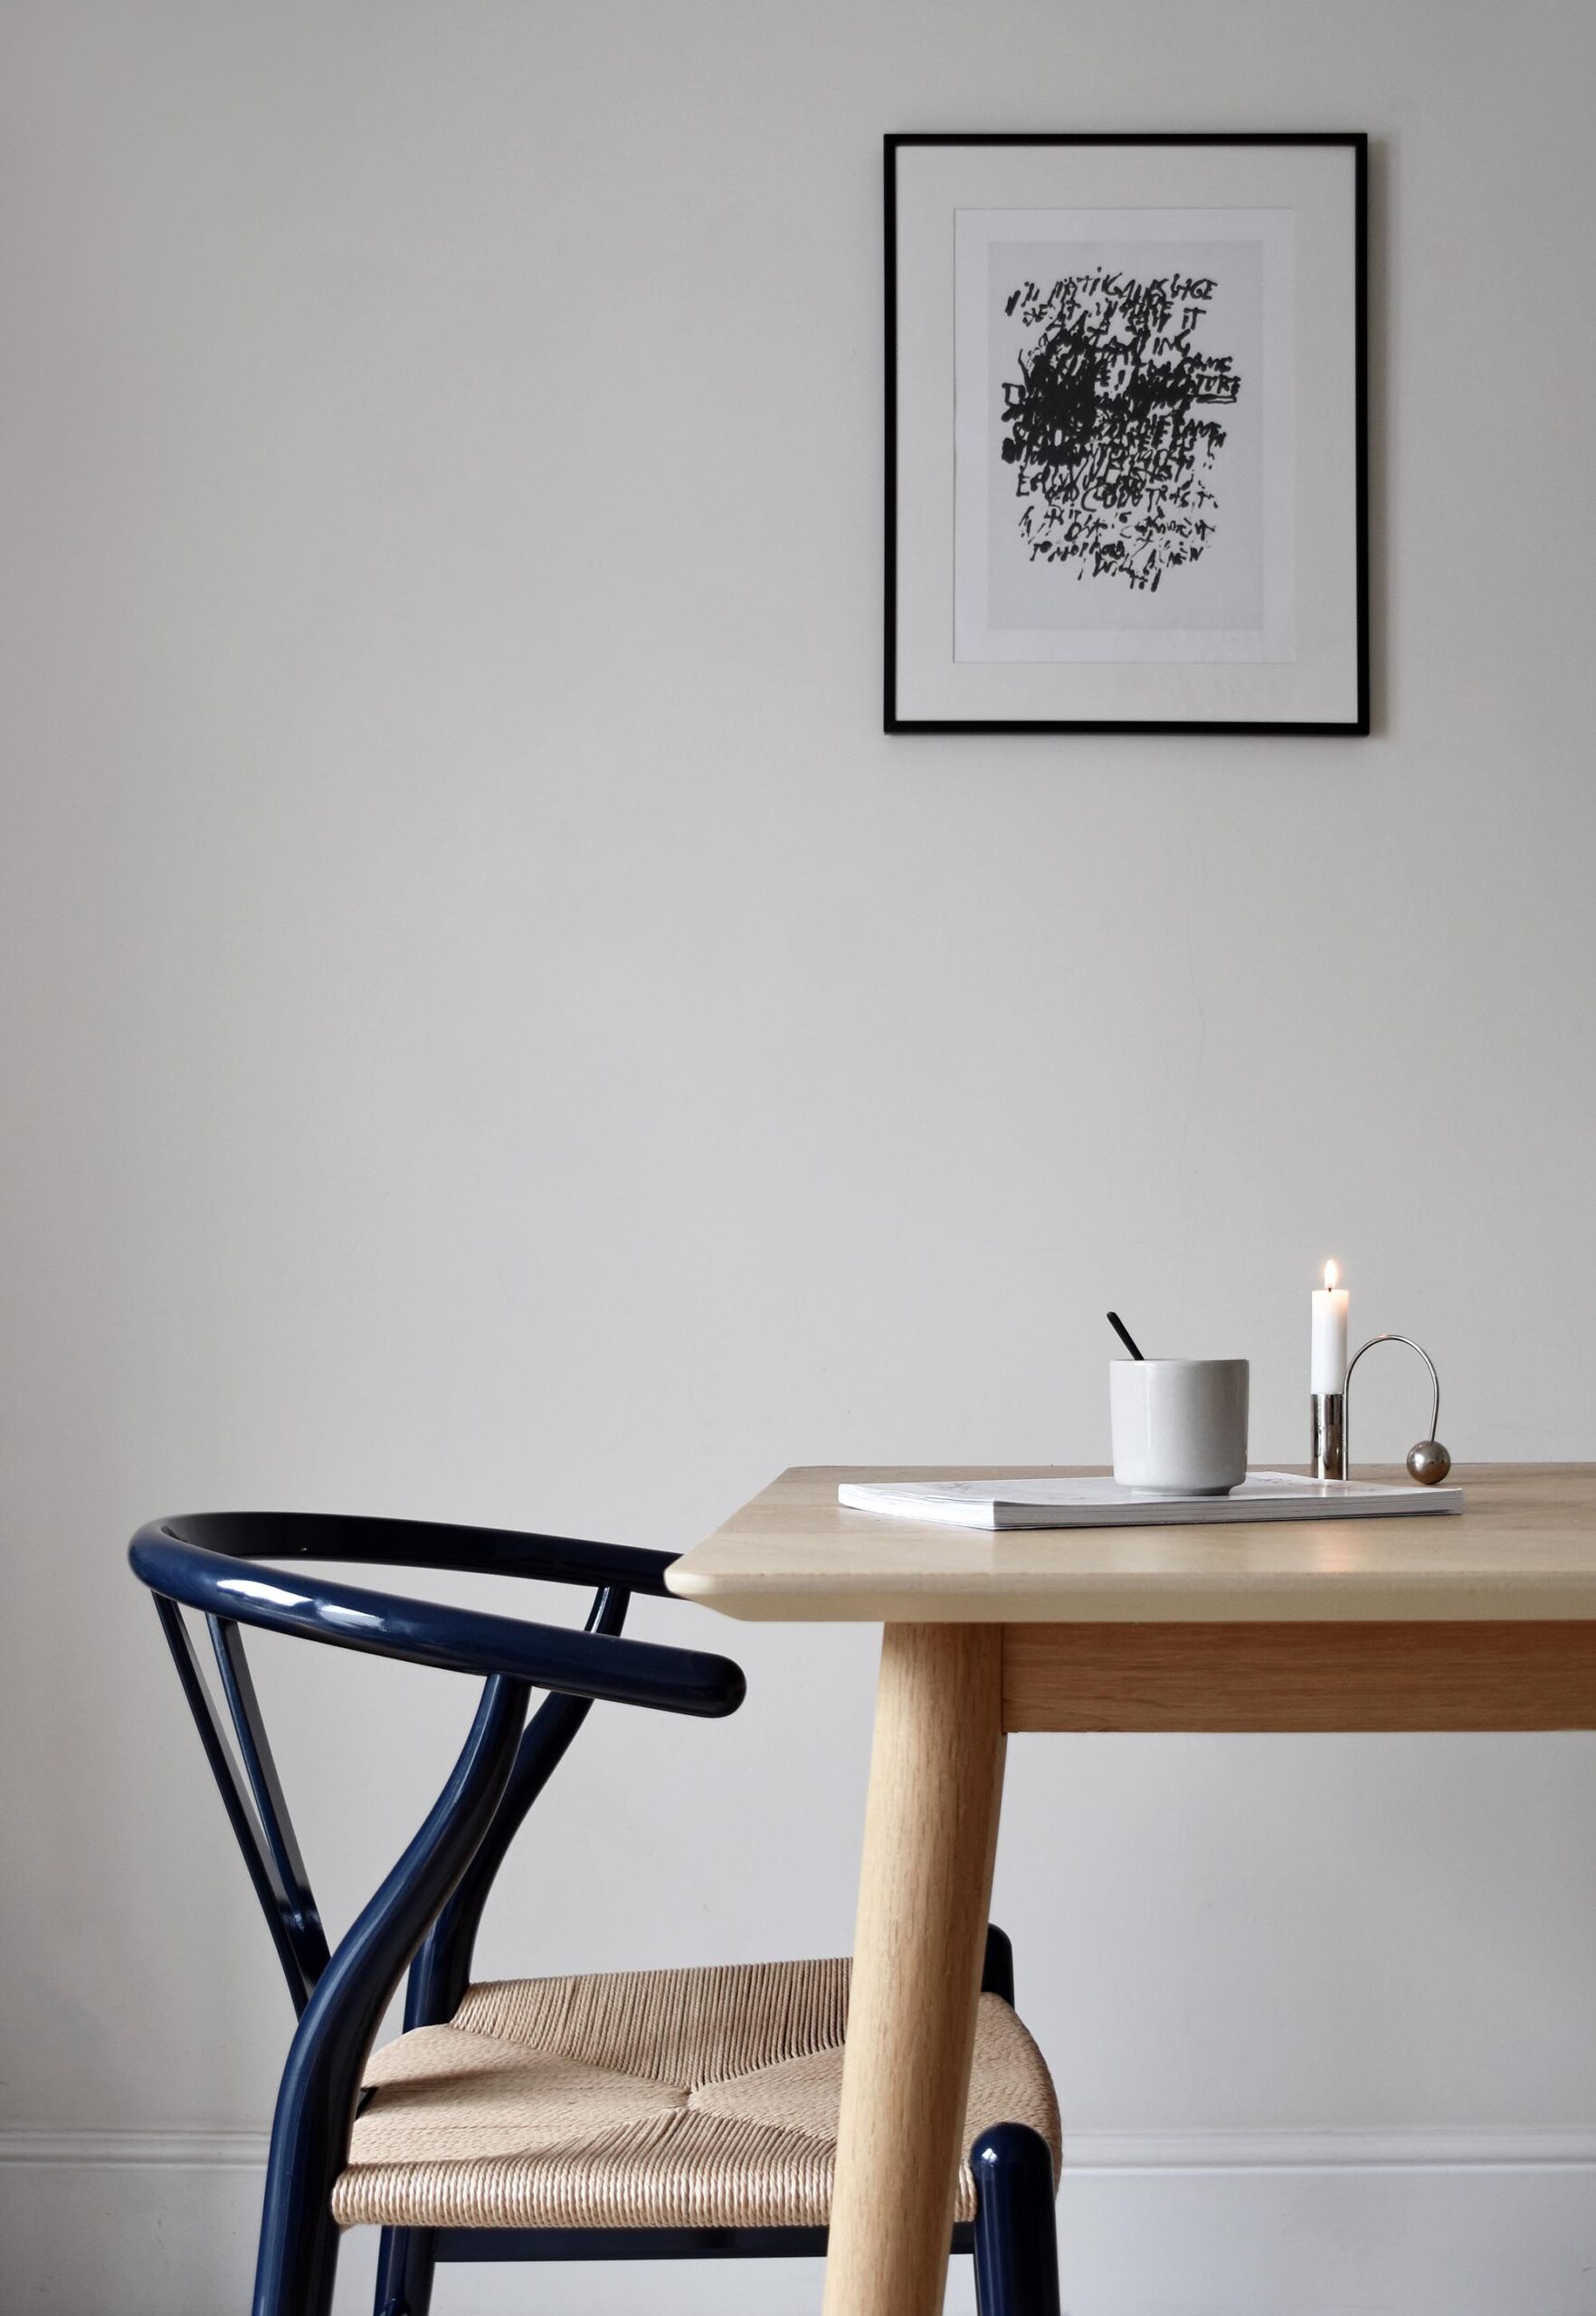 The Iconic Naval Chair: A Timeless
Classic in Design